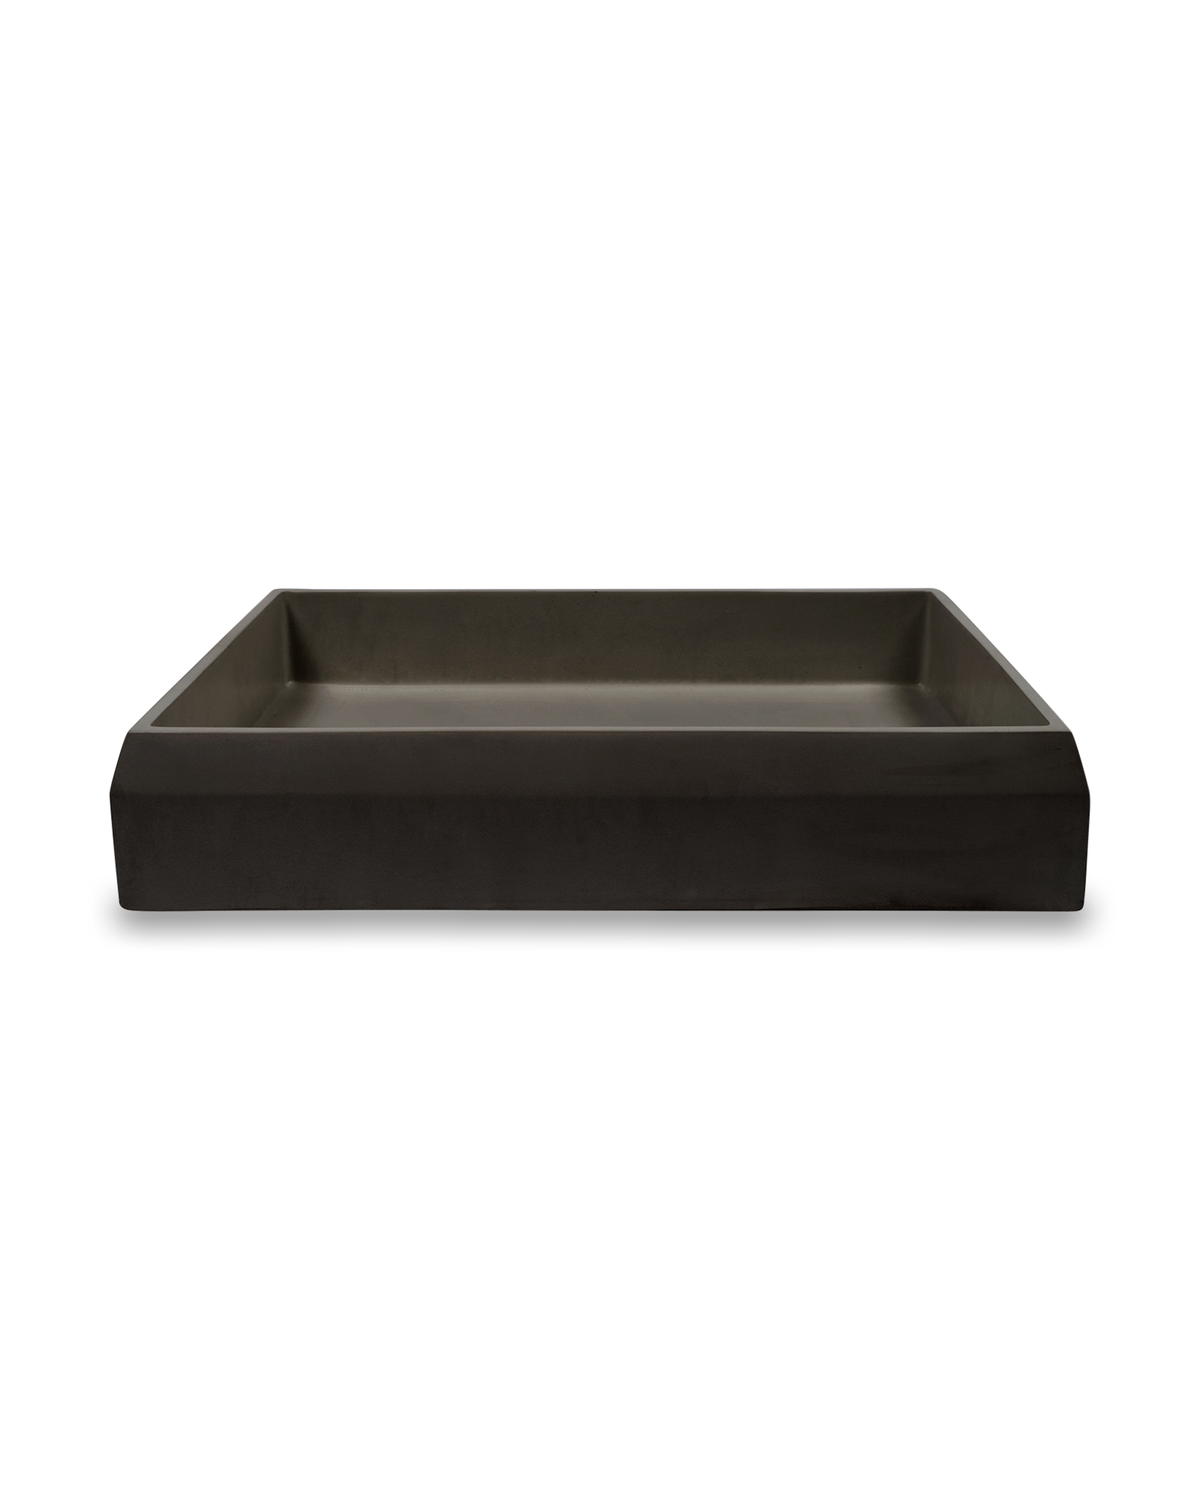 Prism Rectangle Basin - Surface Mount (Charcoal)